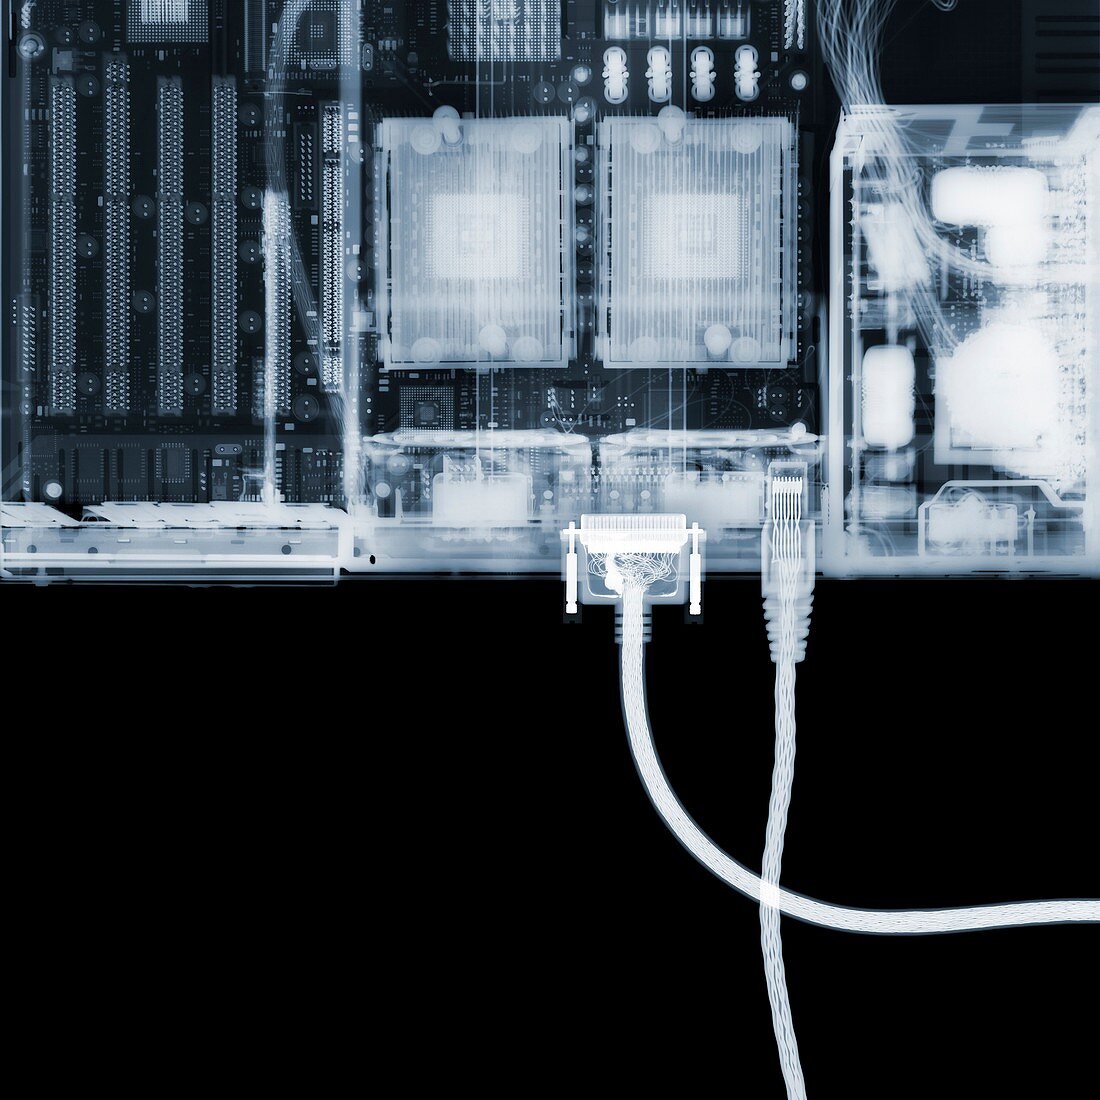 Computer server and cables, X-ray